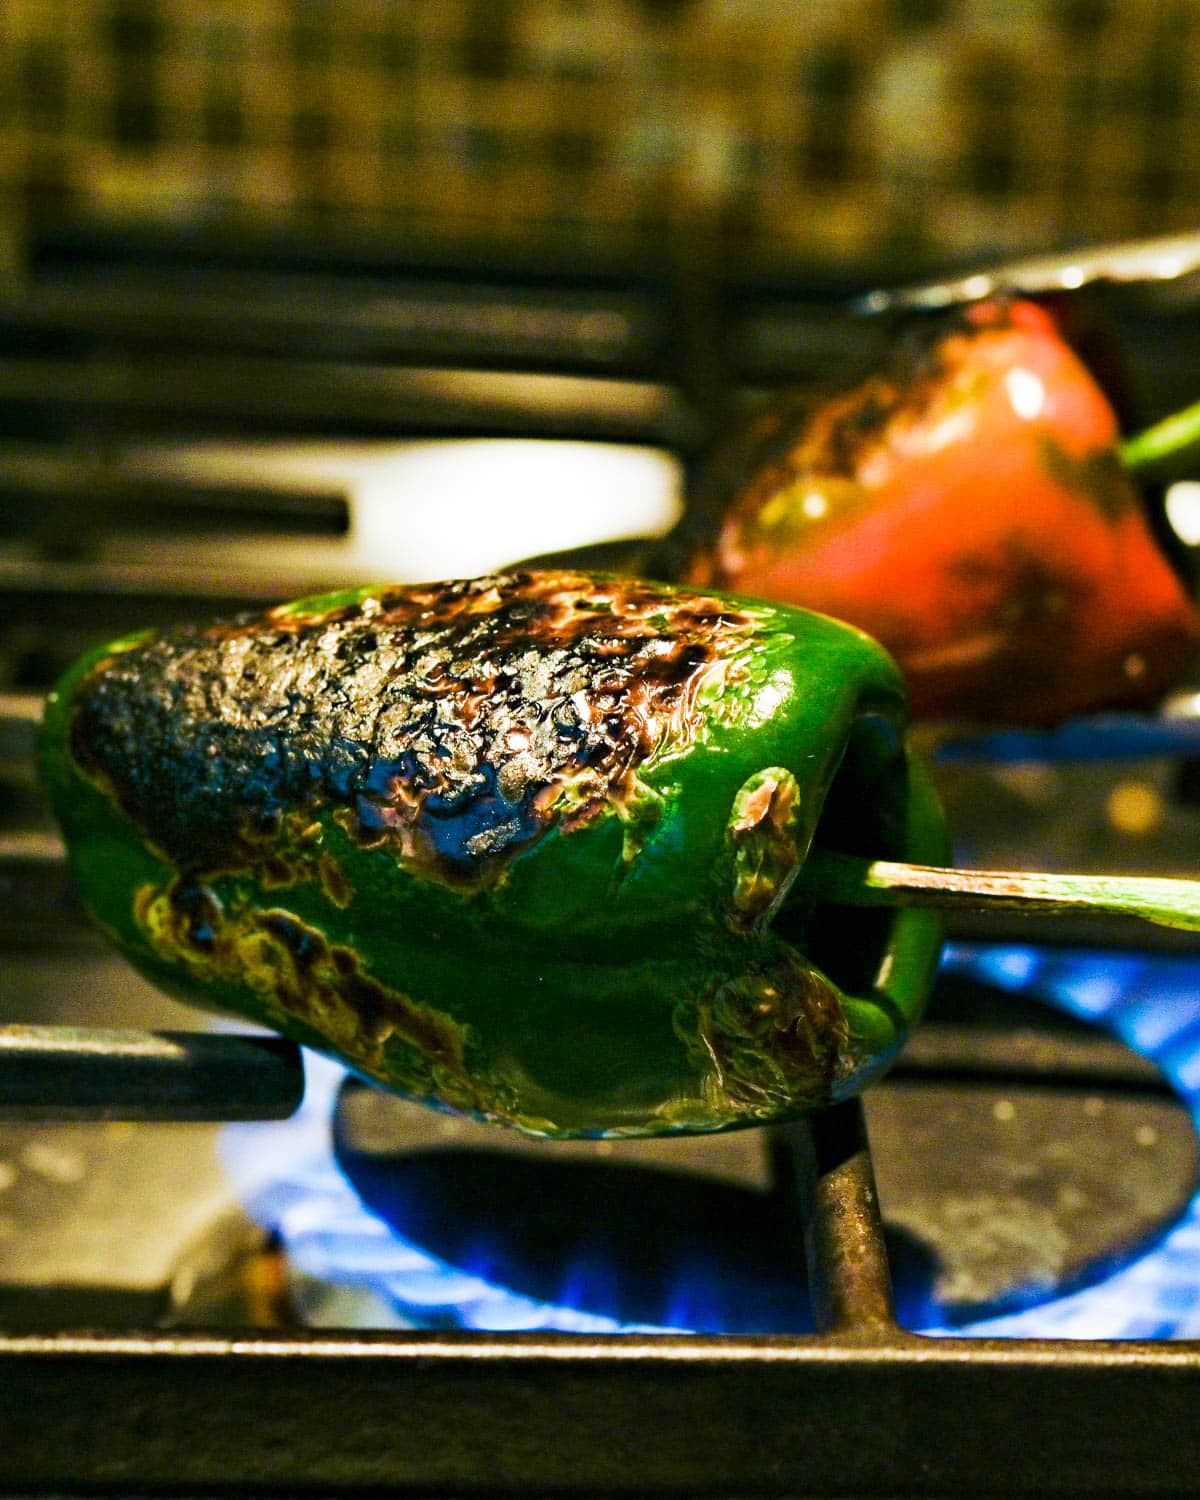 Roasting poblano peppers over an open flame on a gas stove.